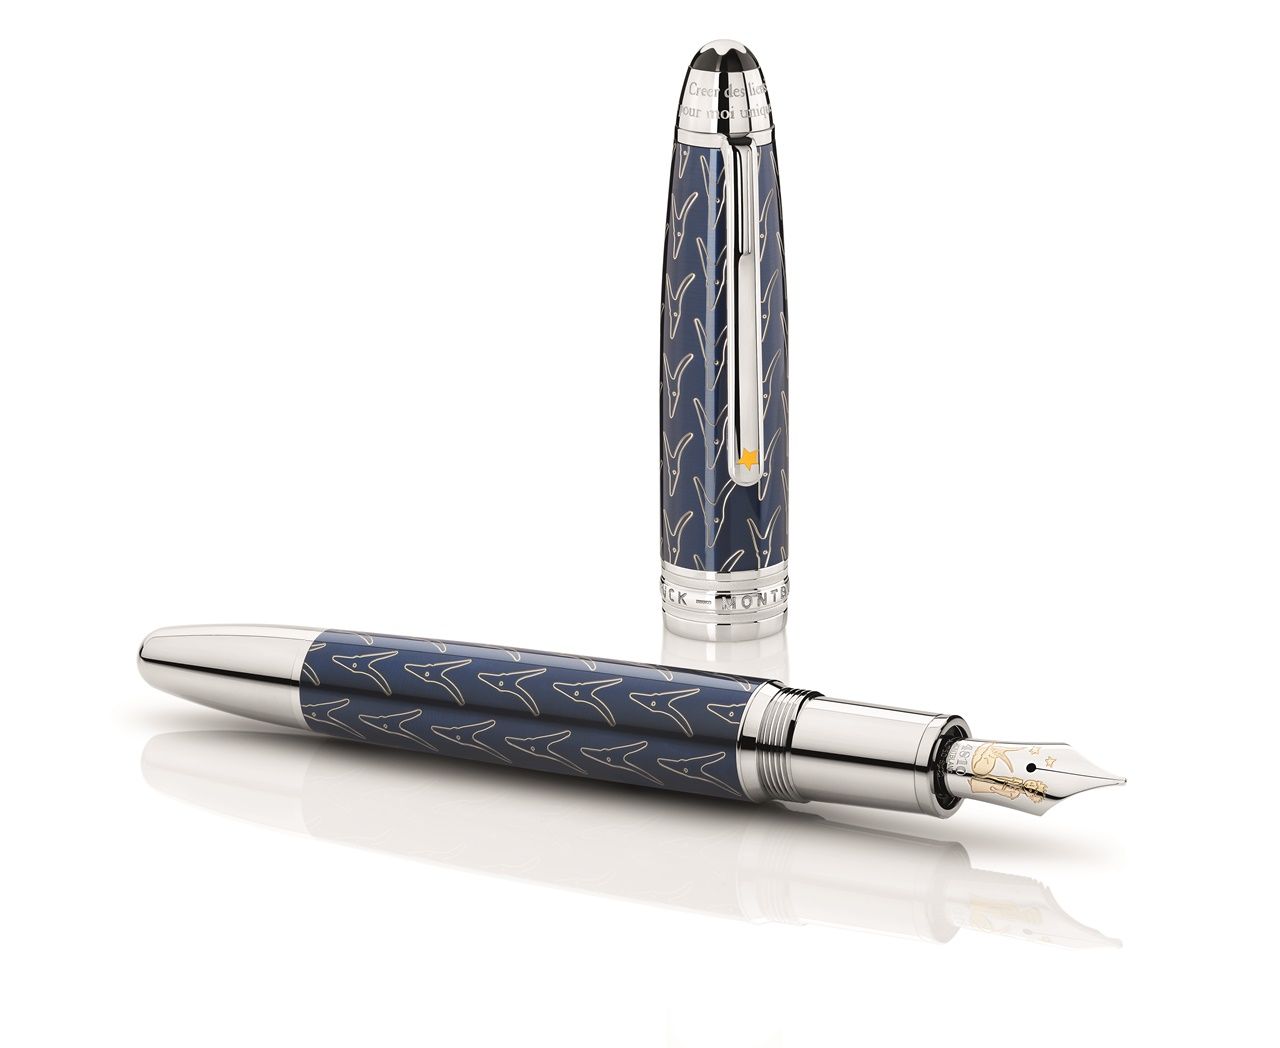 Montblanc Meisterstuck pays tribute to Petit Prince and power of imagination.